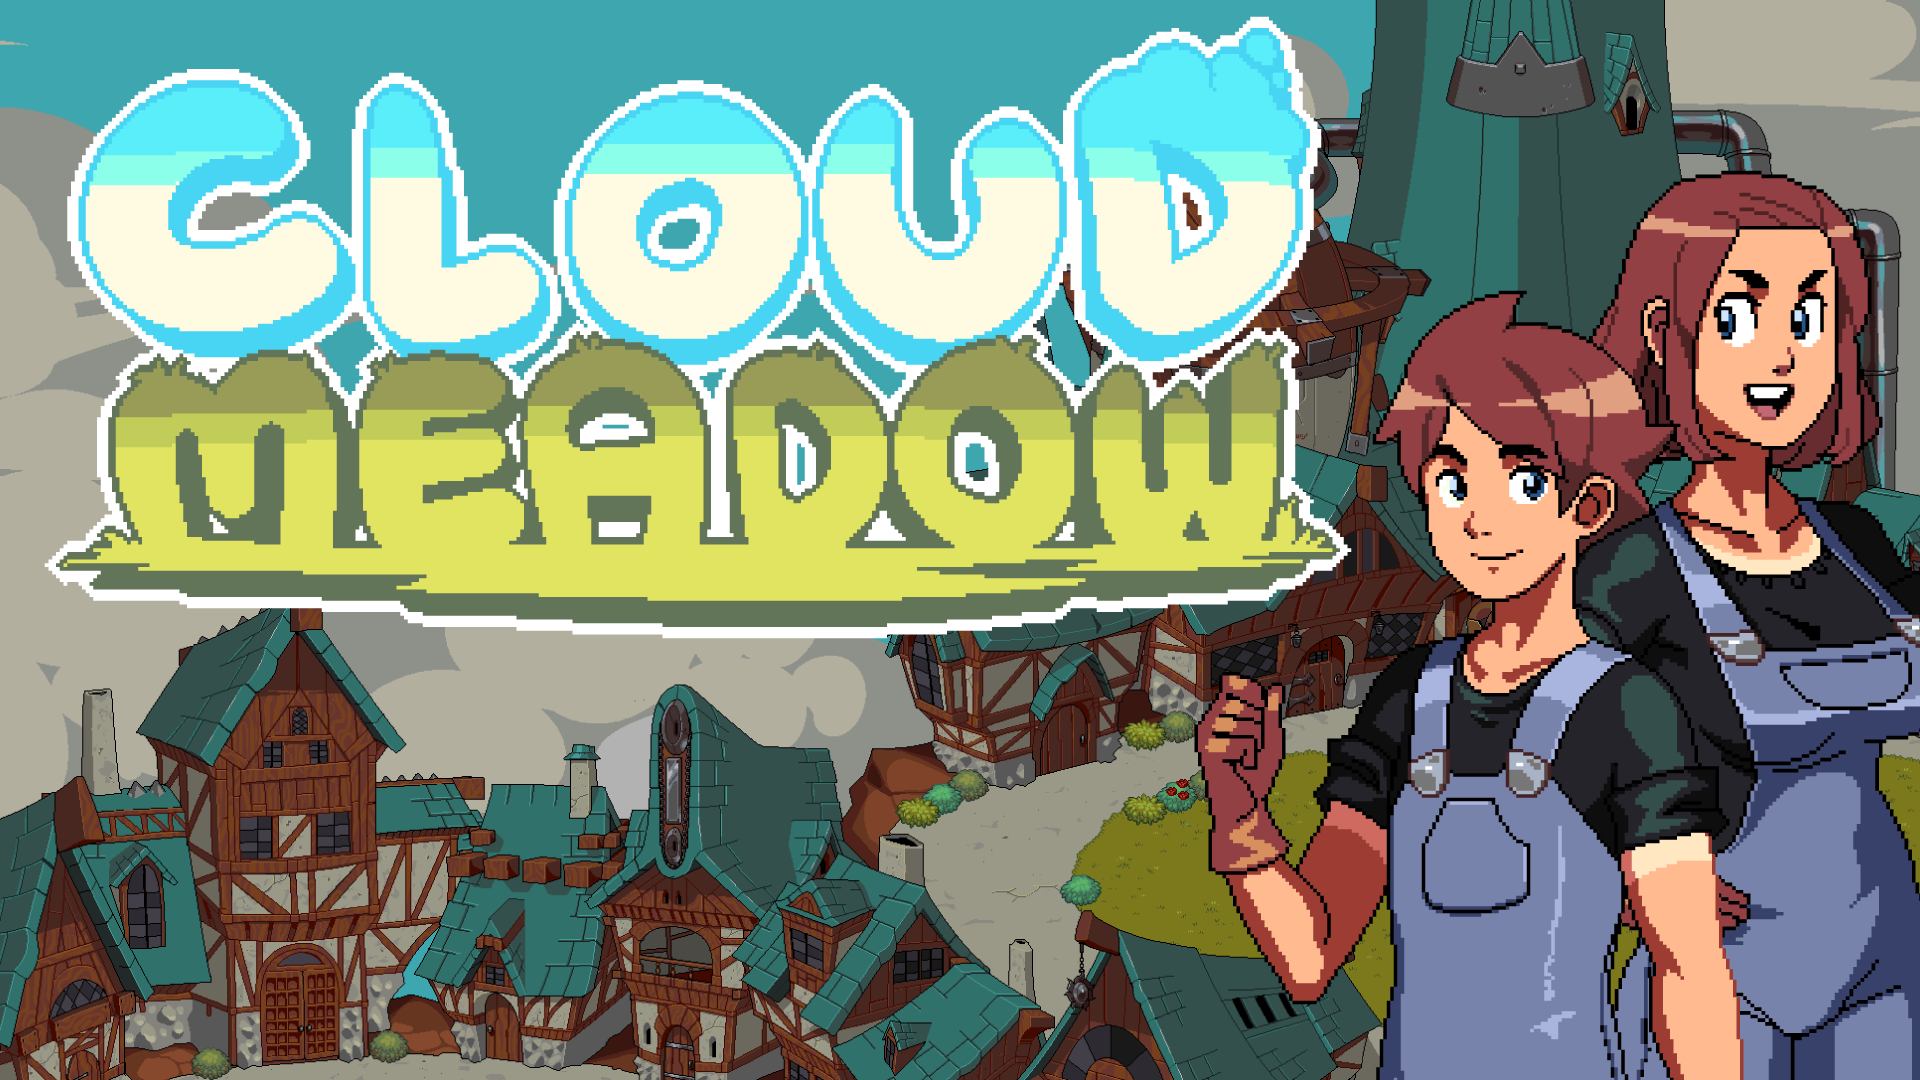 Cloud meadow android